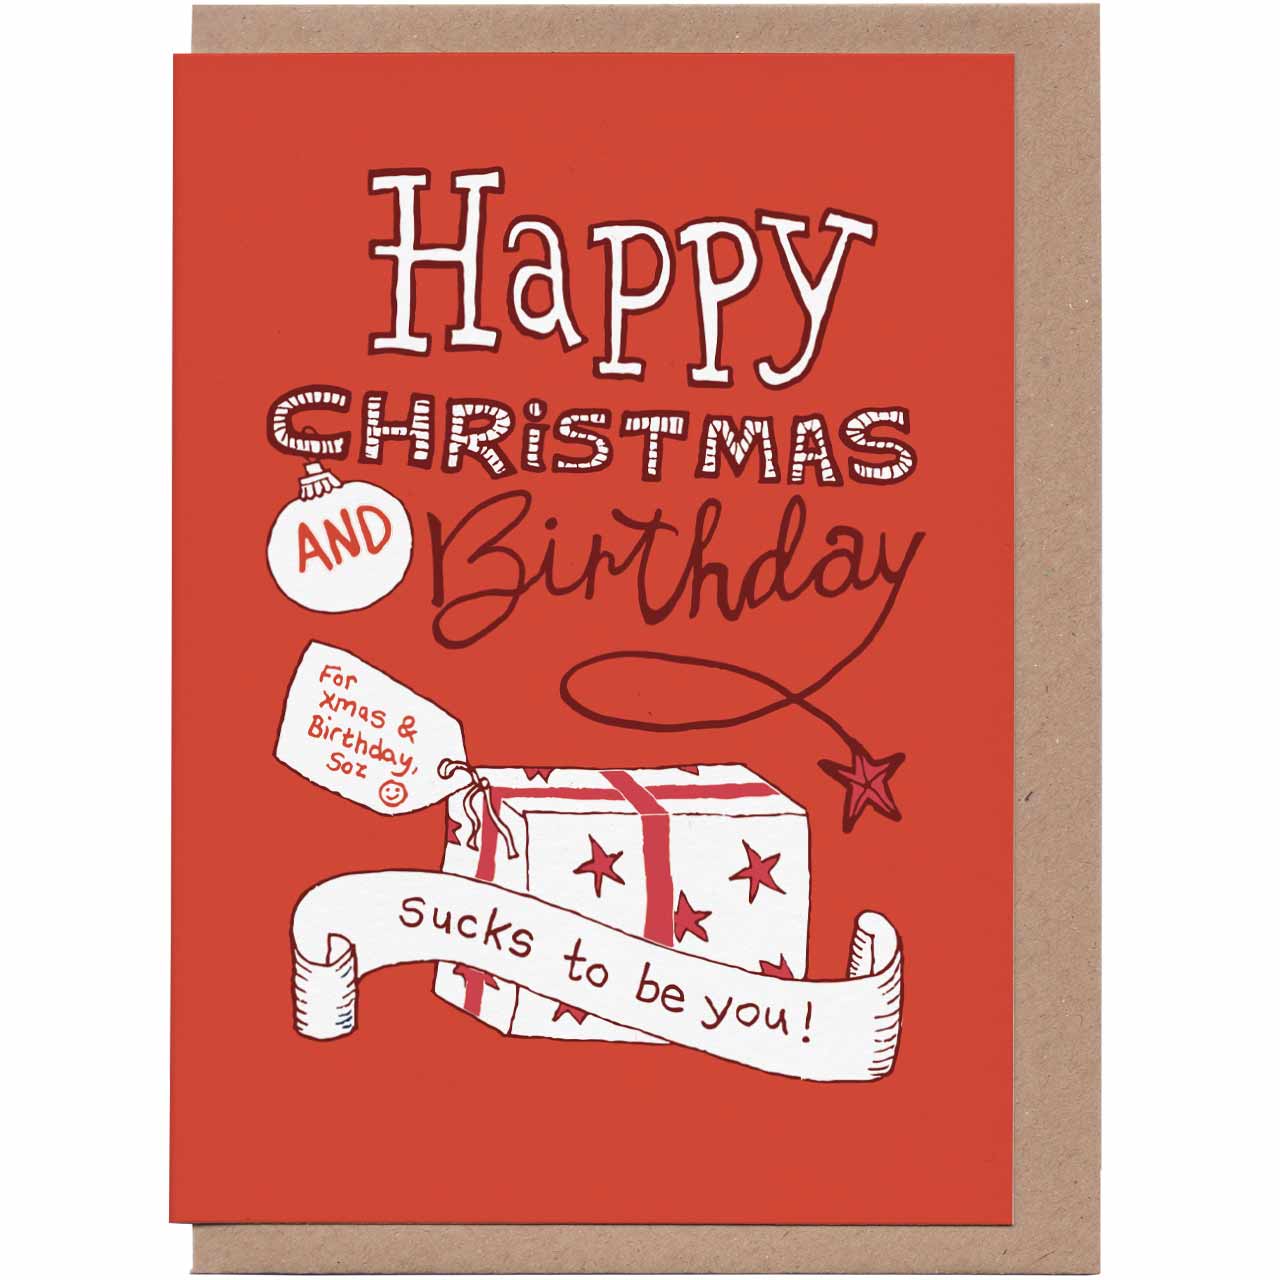 Happy Christmas and Birthday Greeting Card